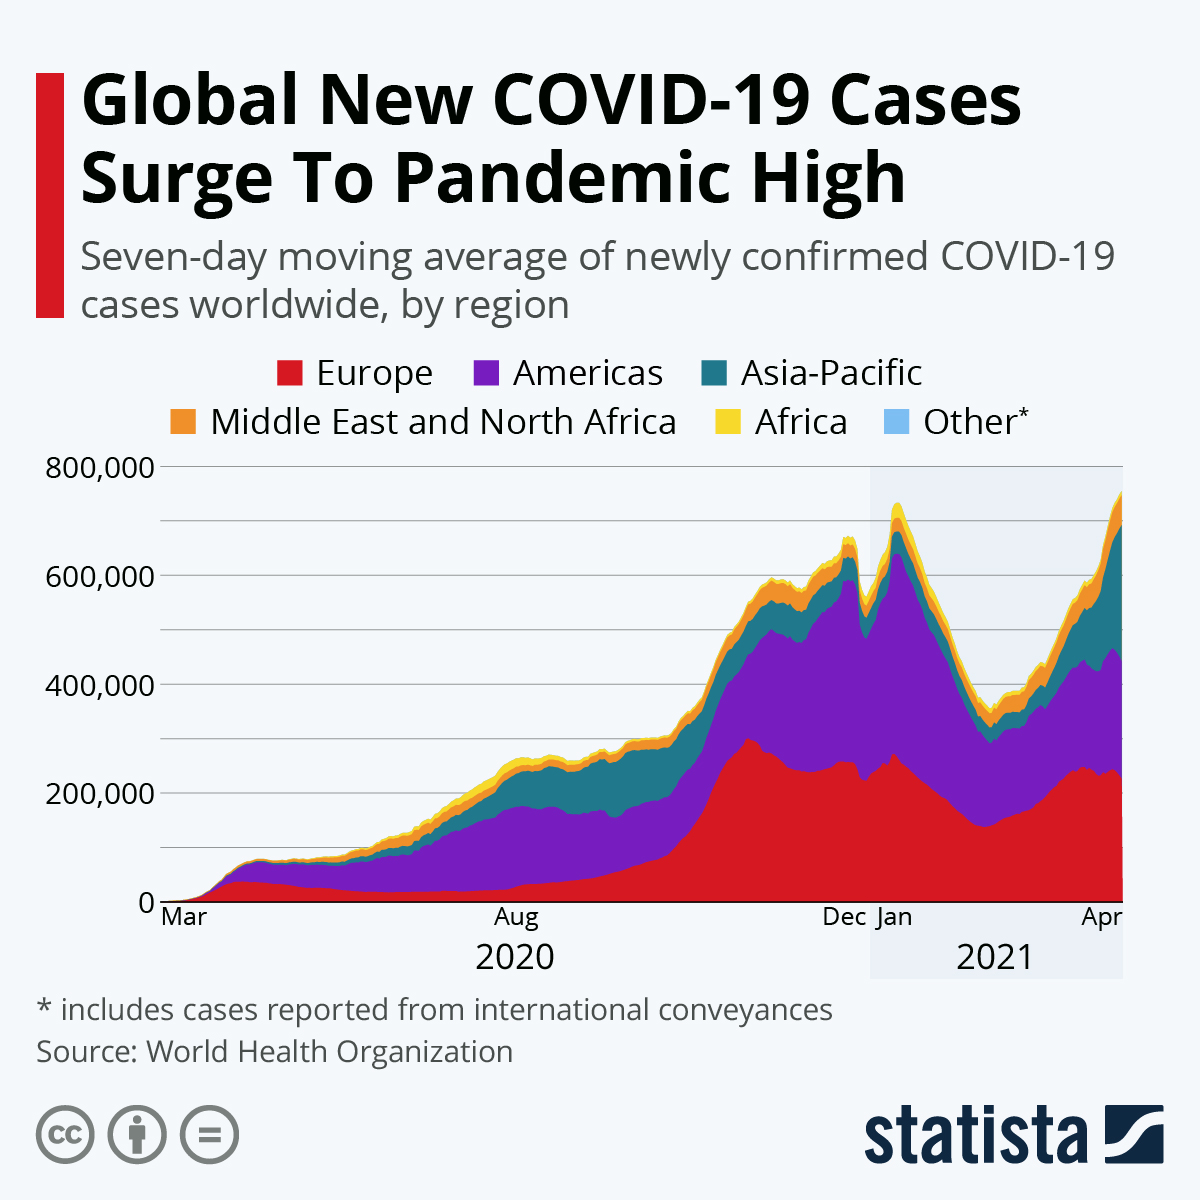 Global New COVID-19 Cases Surge To Pandemic High